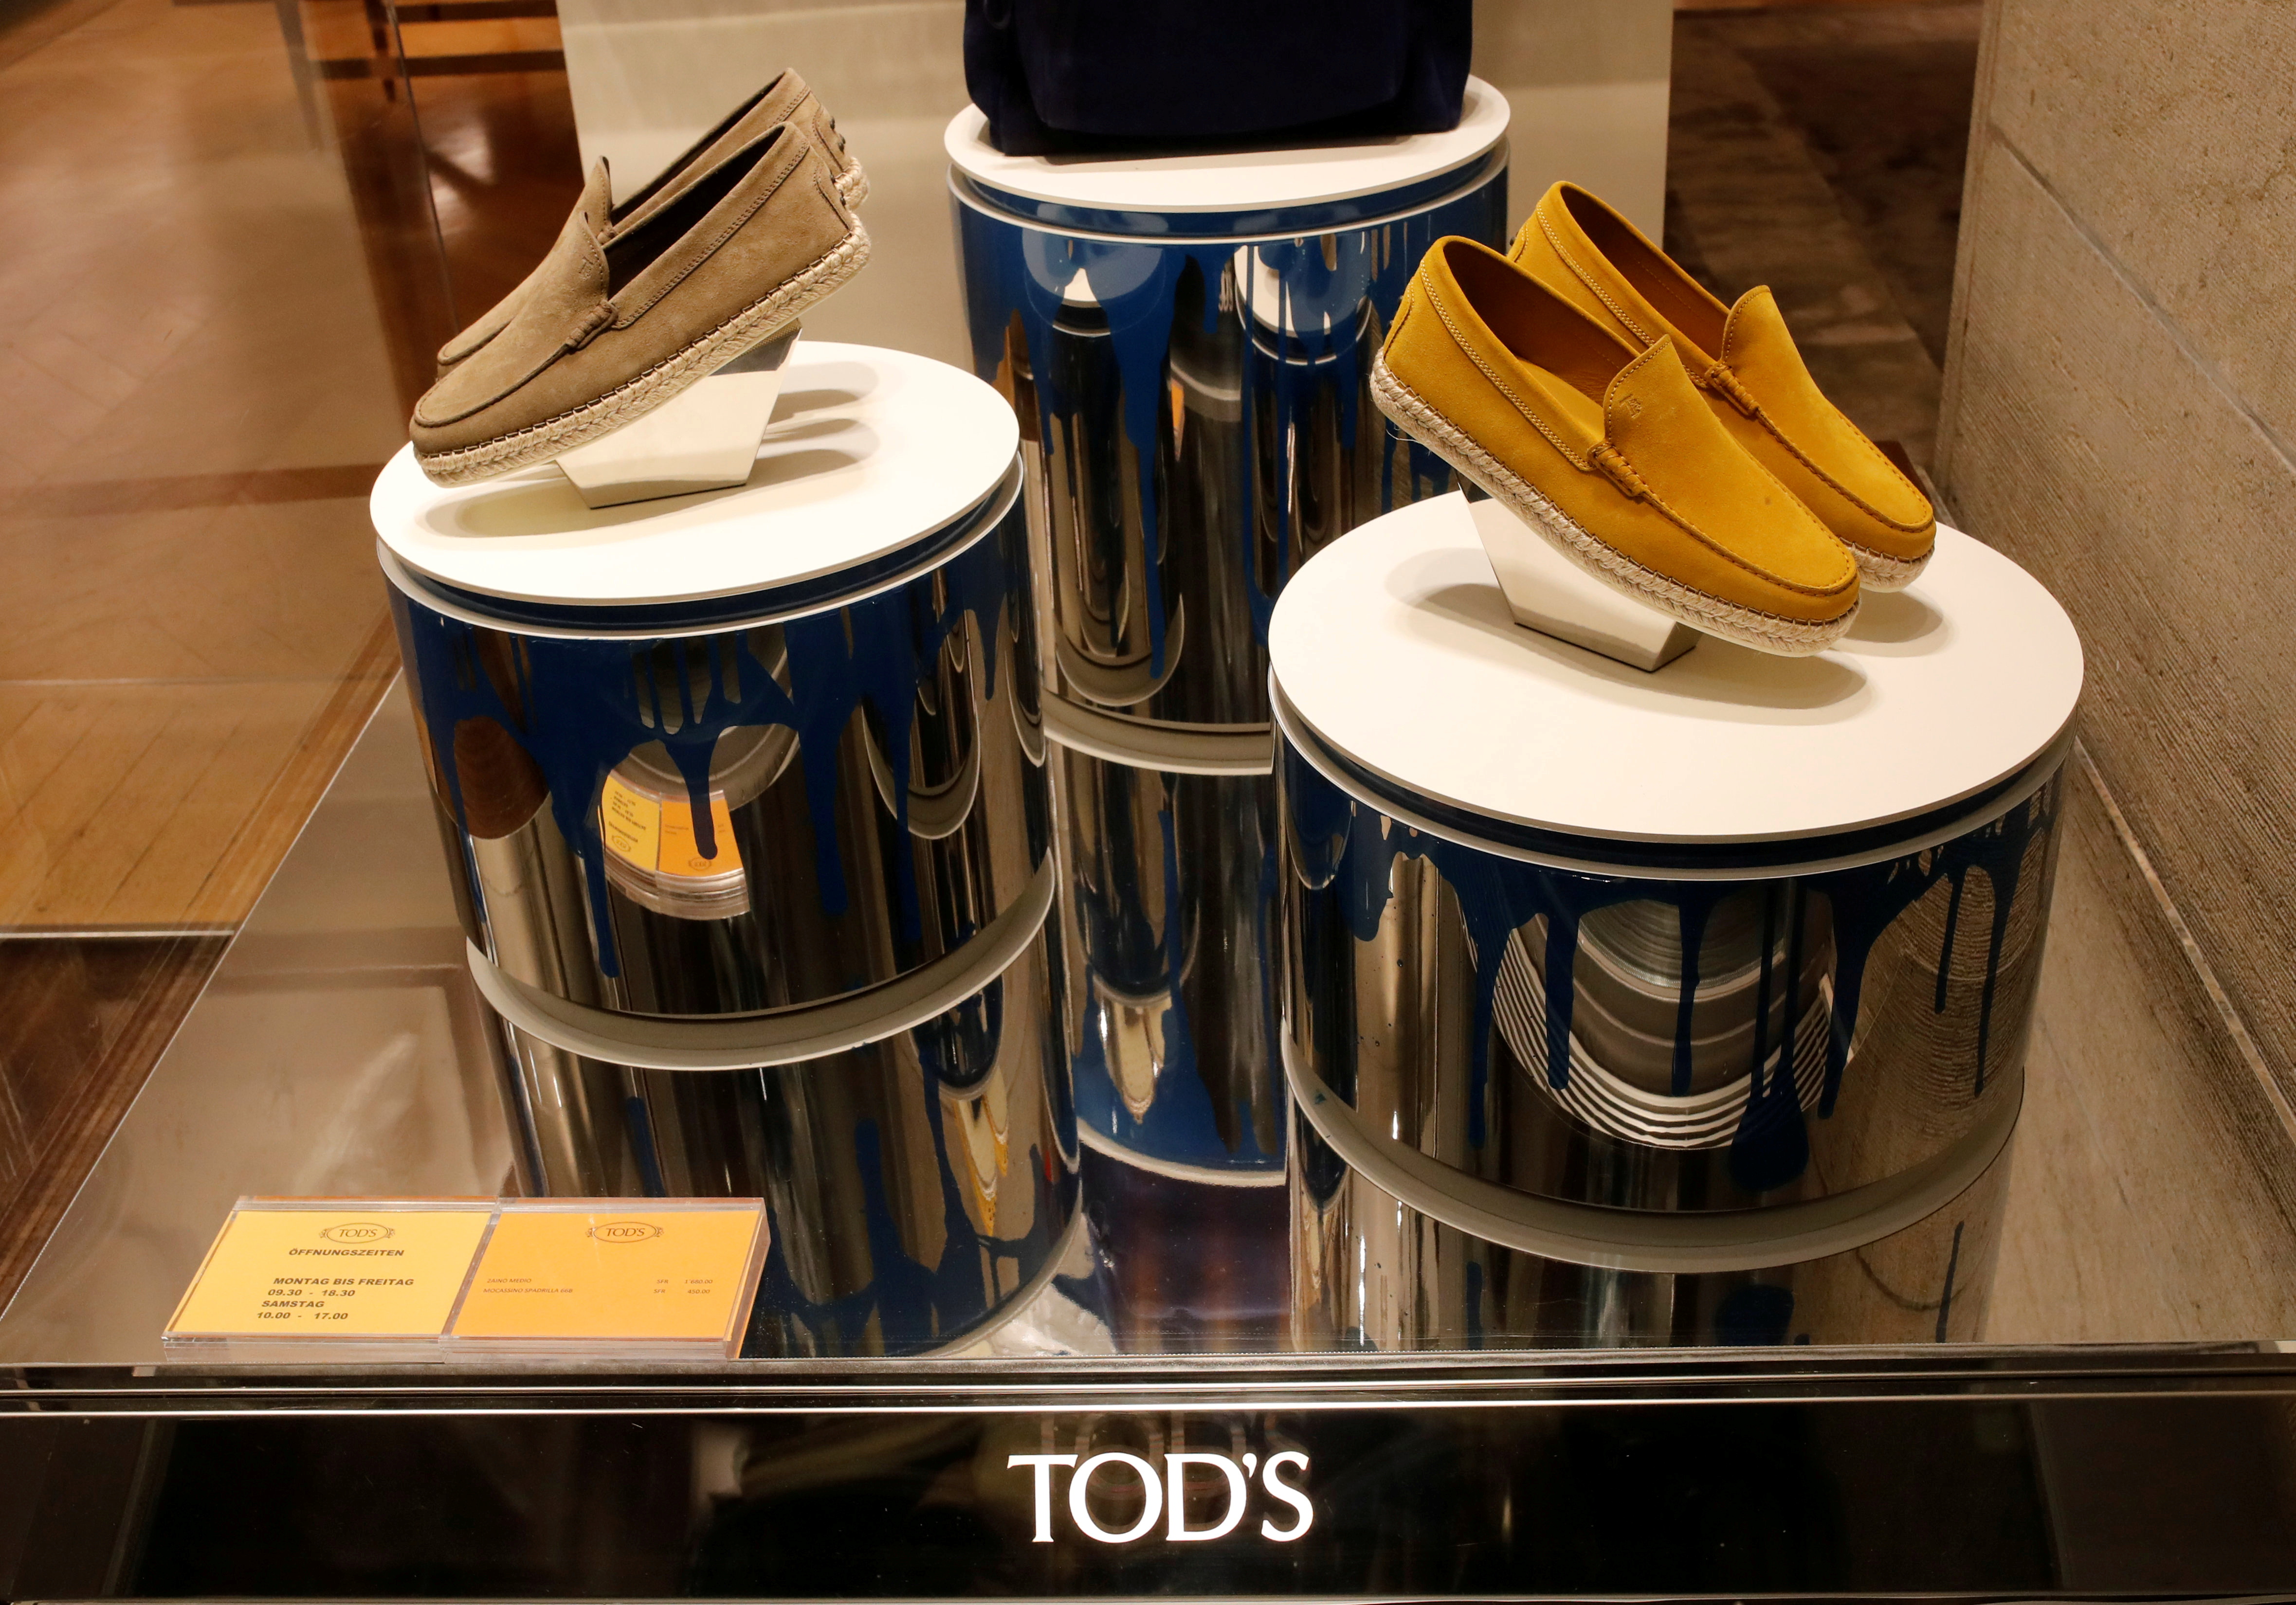 Shoes of Italian luxury shoemaker Tod's are displayed in the window of the company's store in Zurich